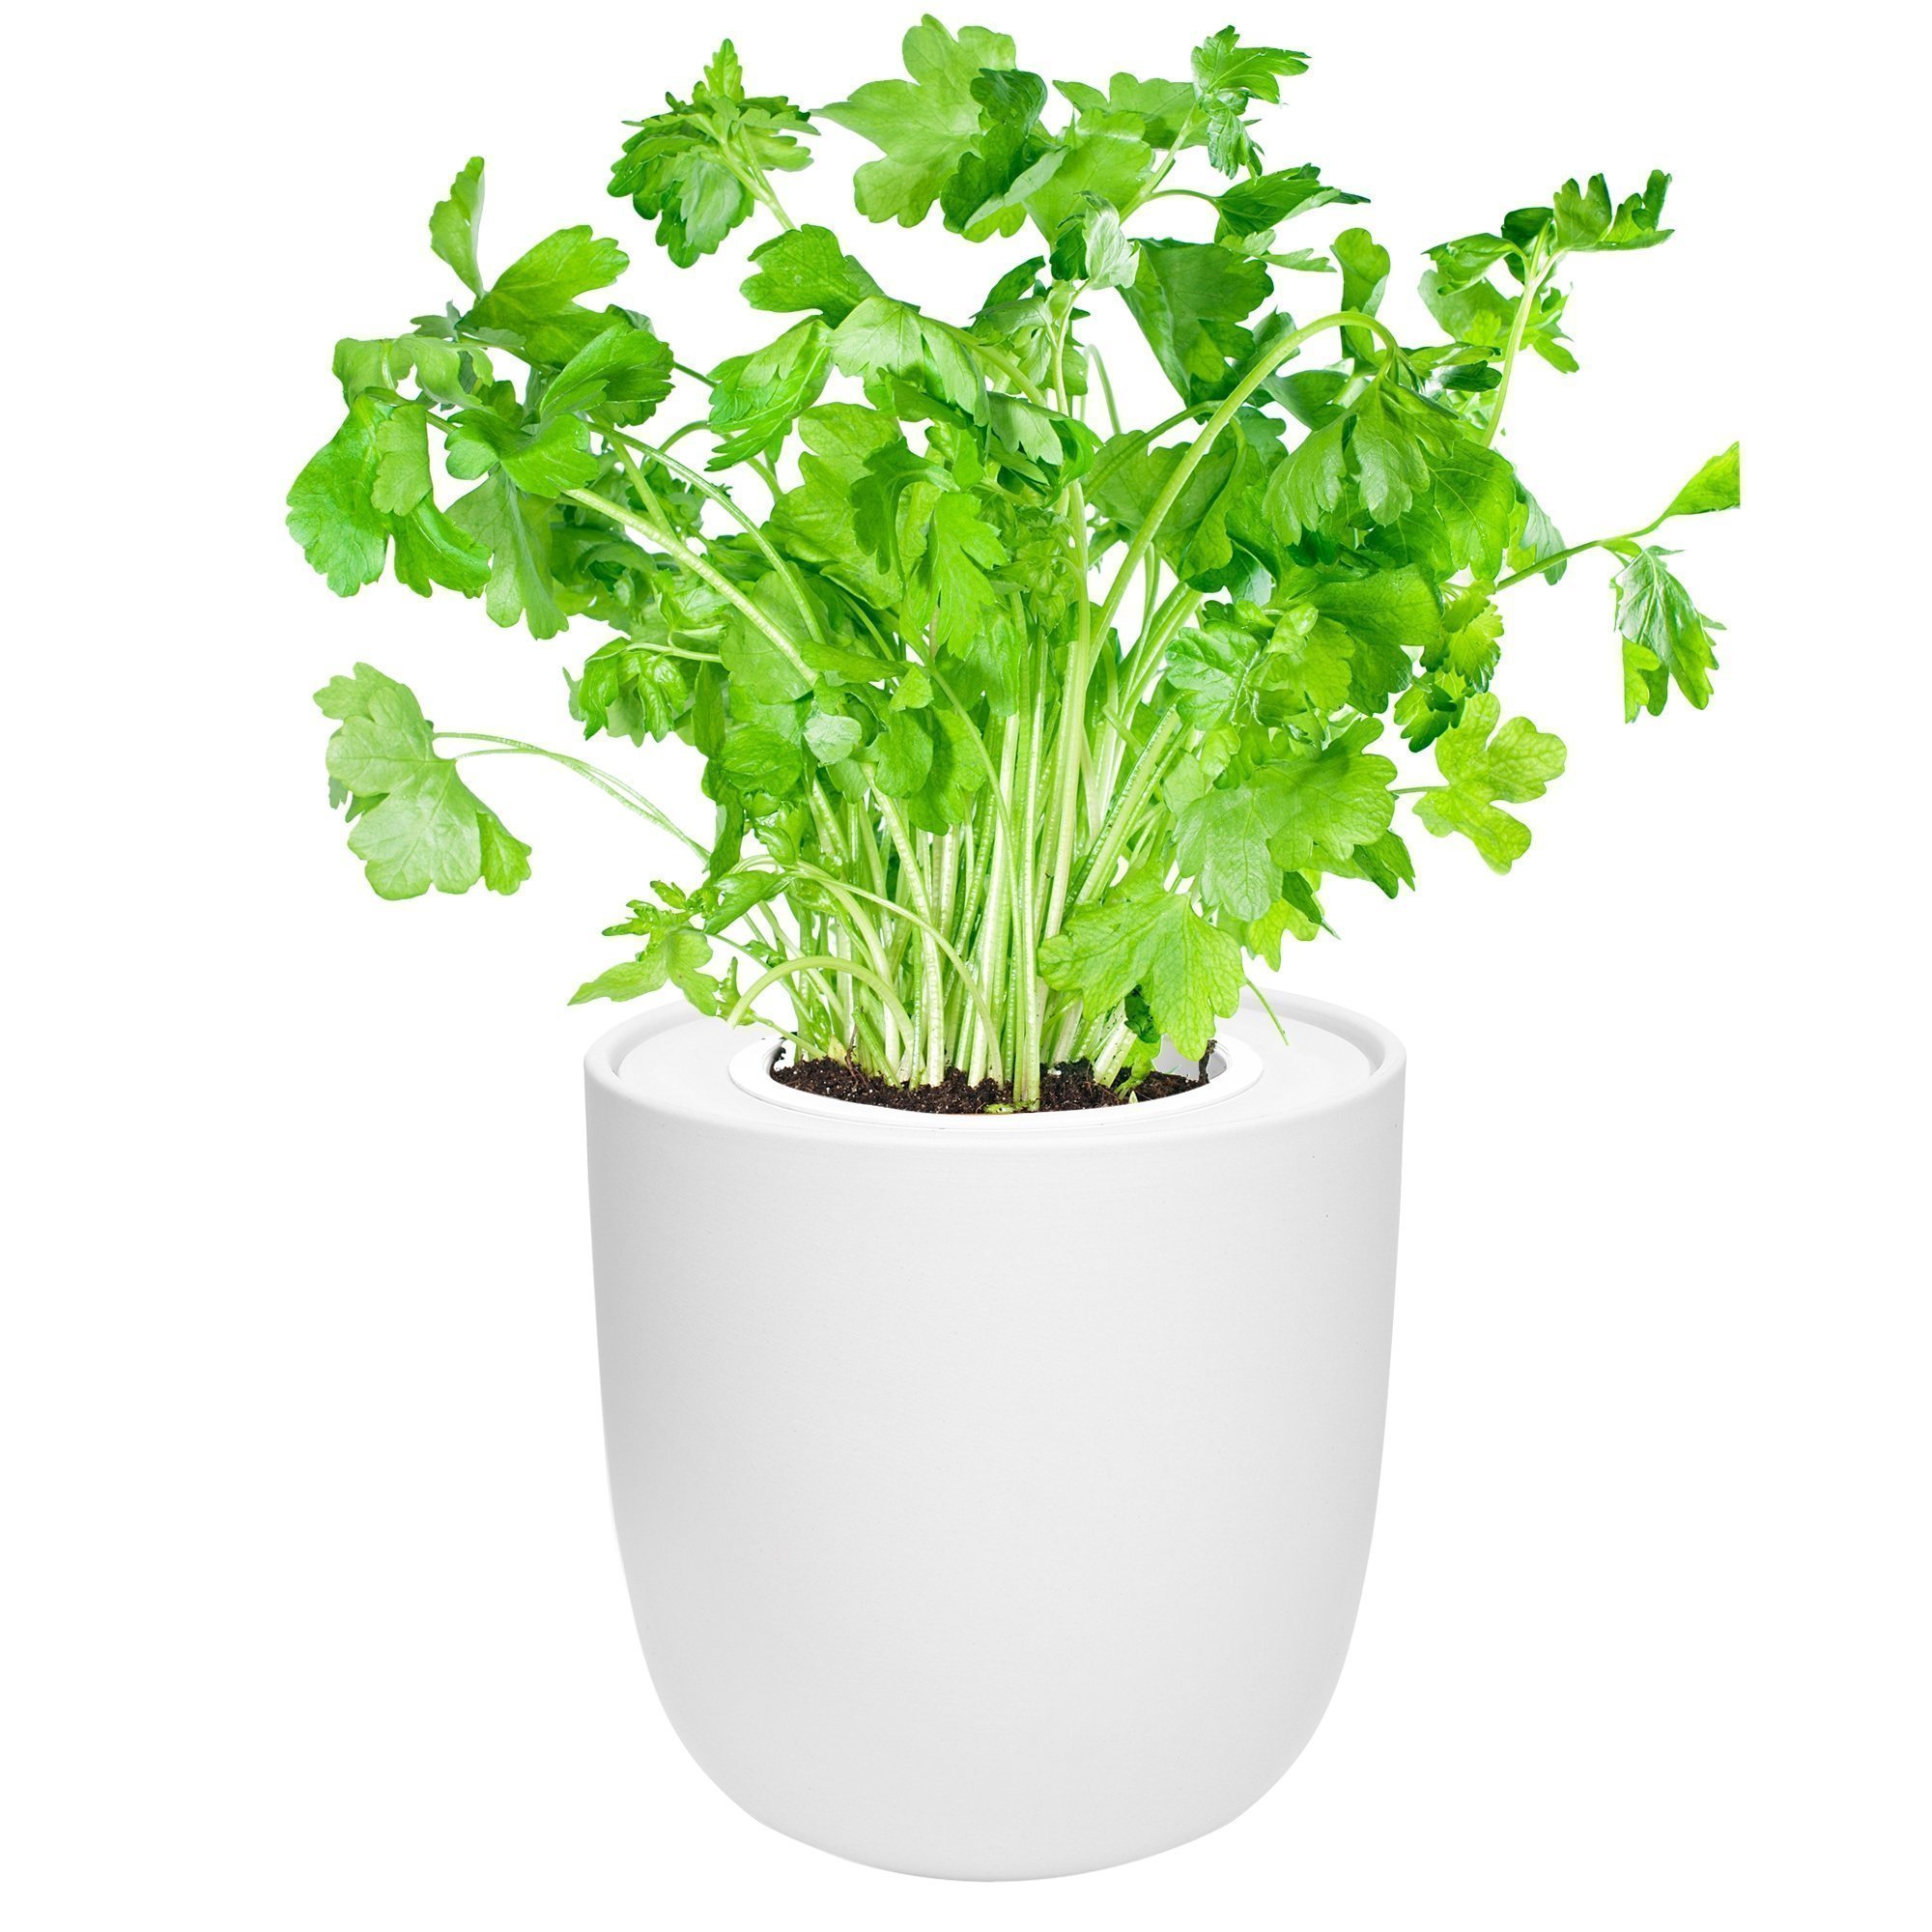 Parsley White Ceramic Pot Hydroponic Growing Kit with Organic Seeds